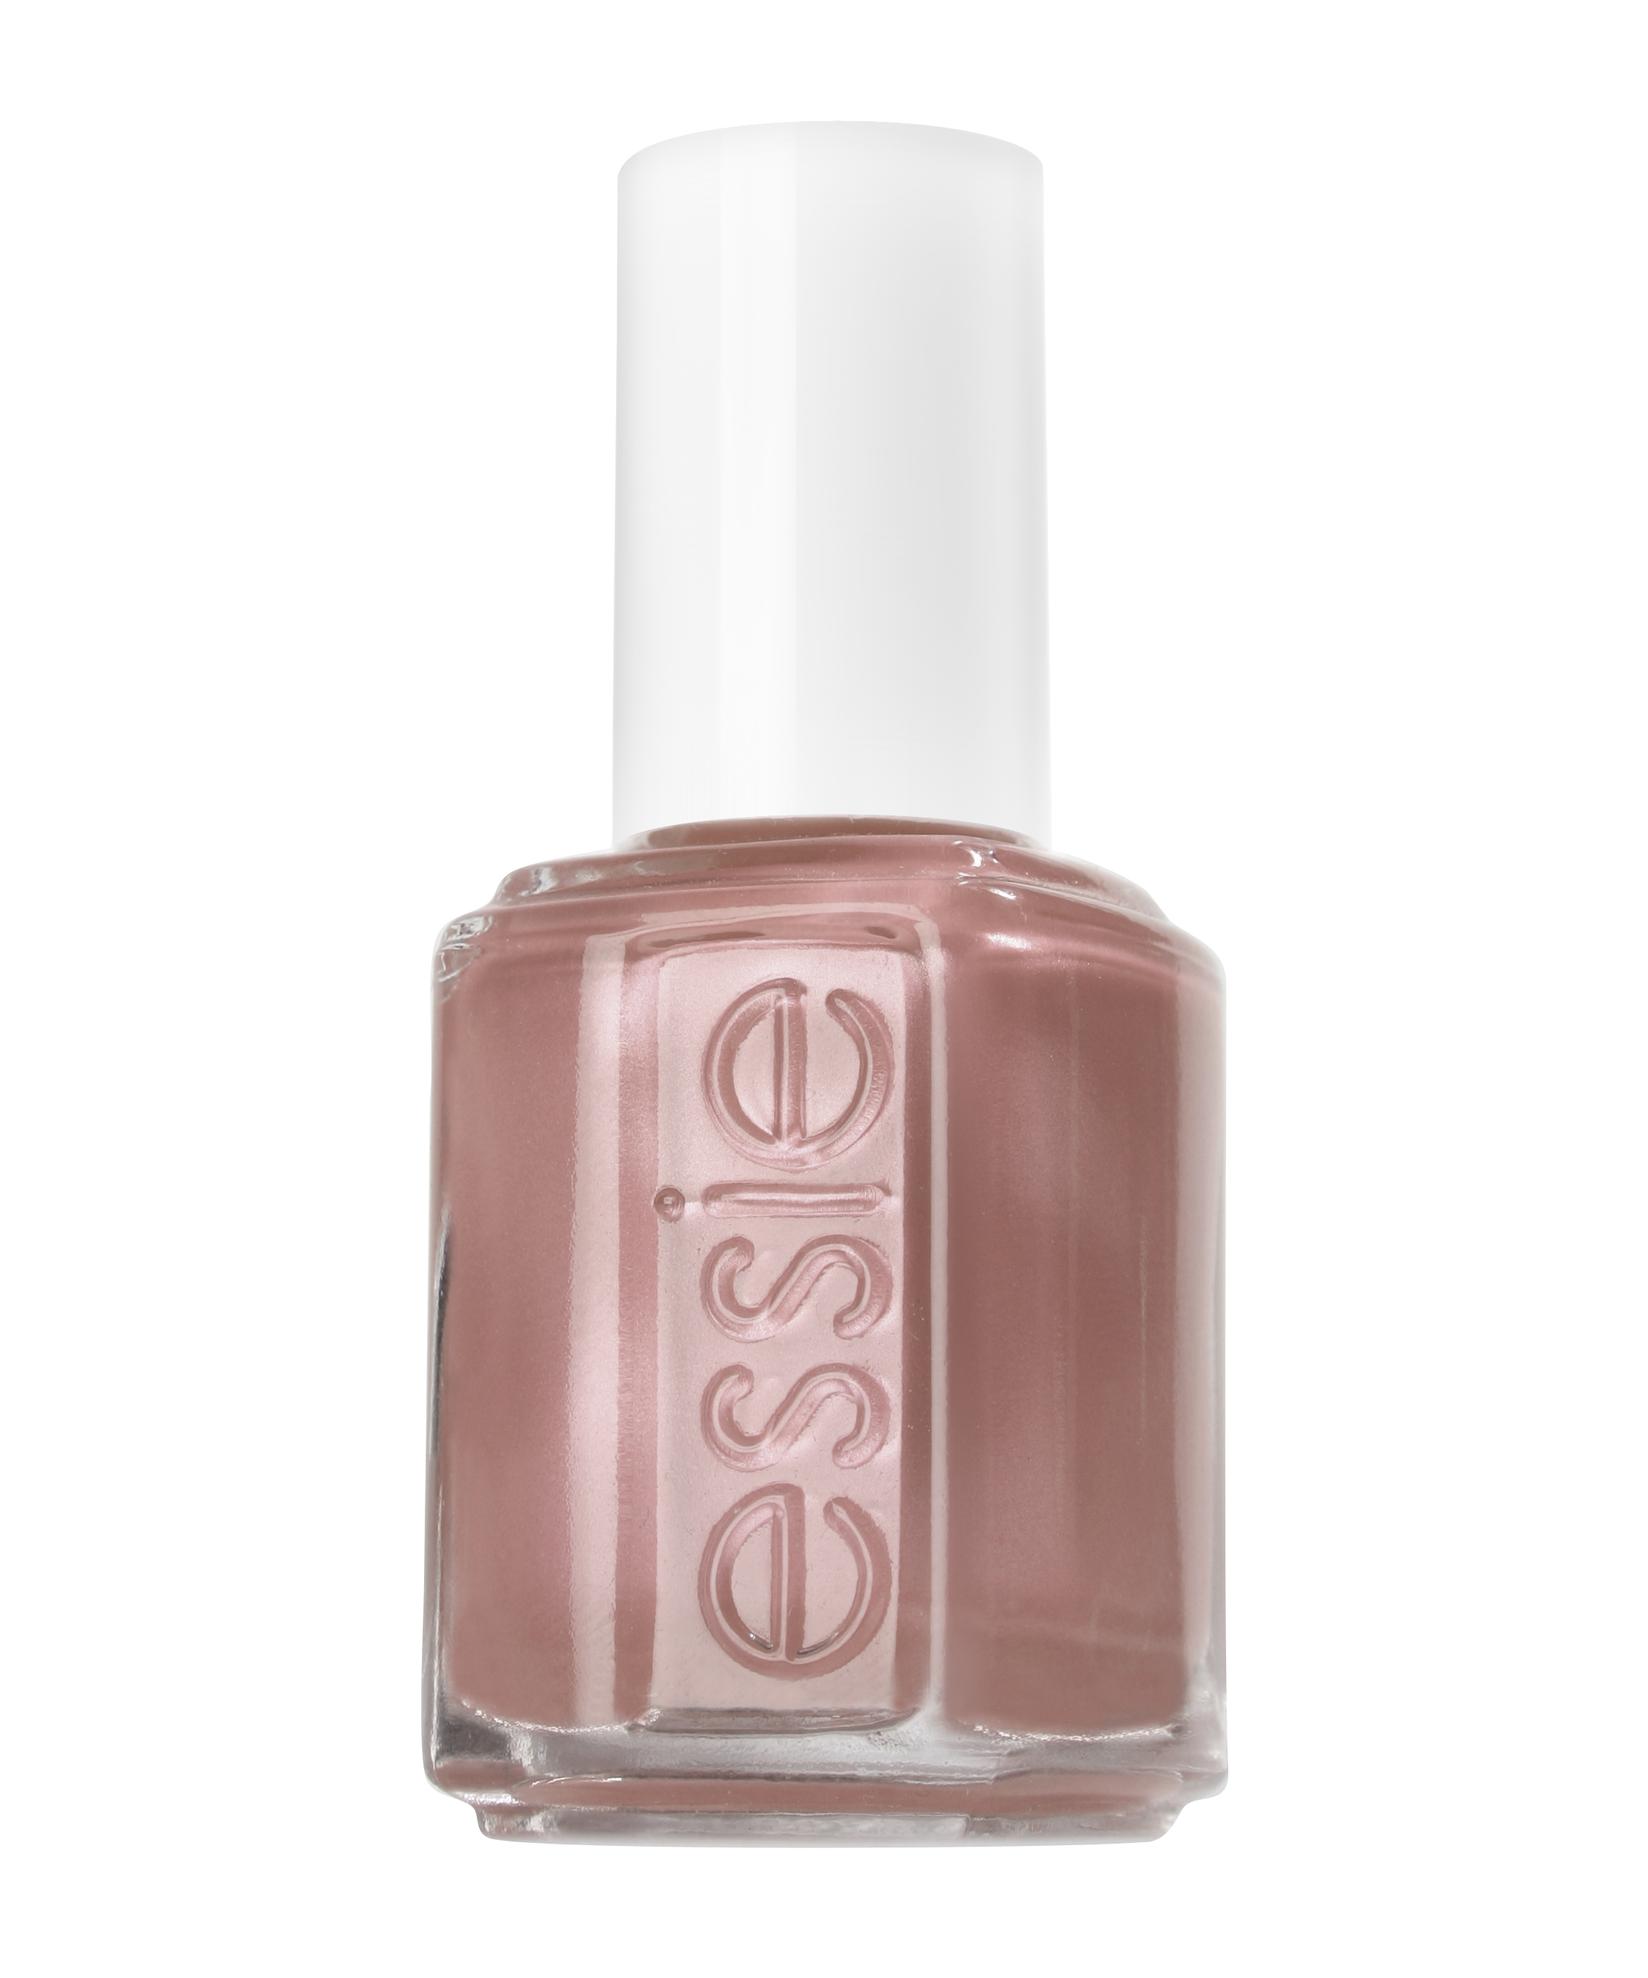 Selected image for ESSIE Lak za nokte 82 Buy me a cameo